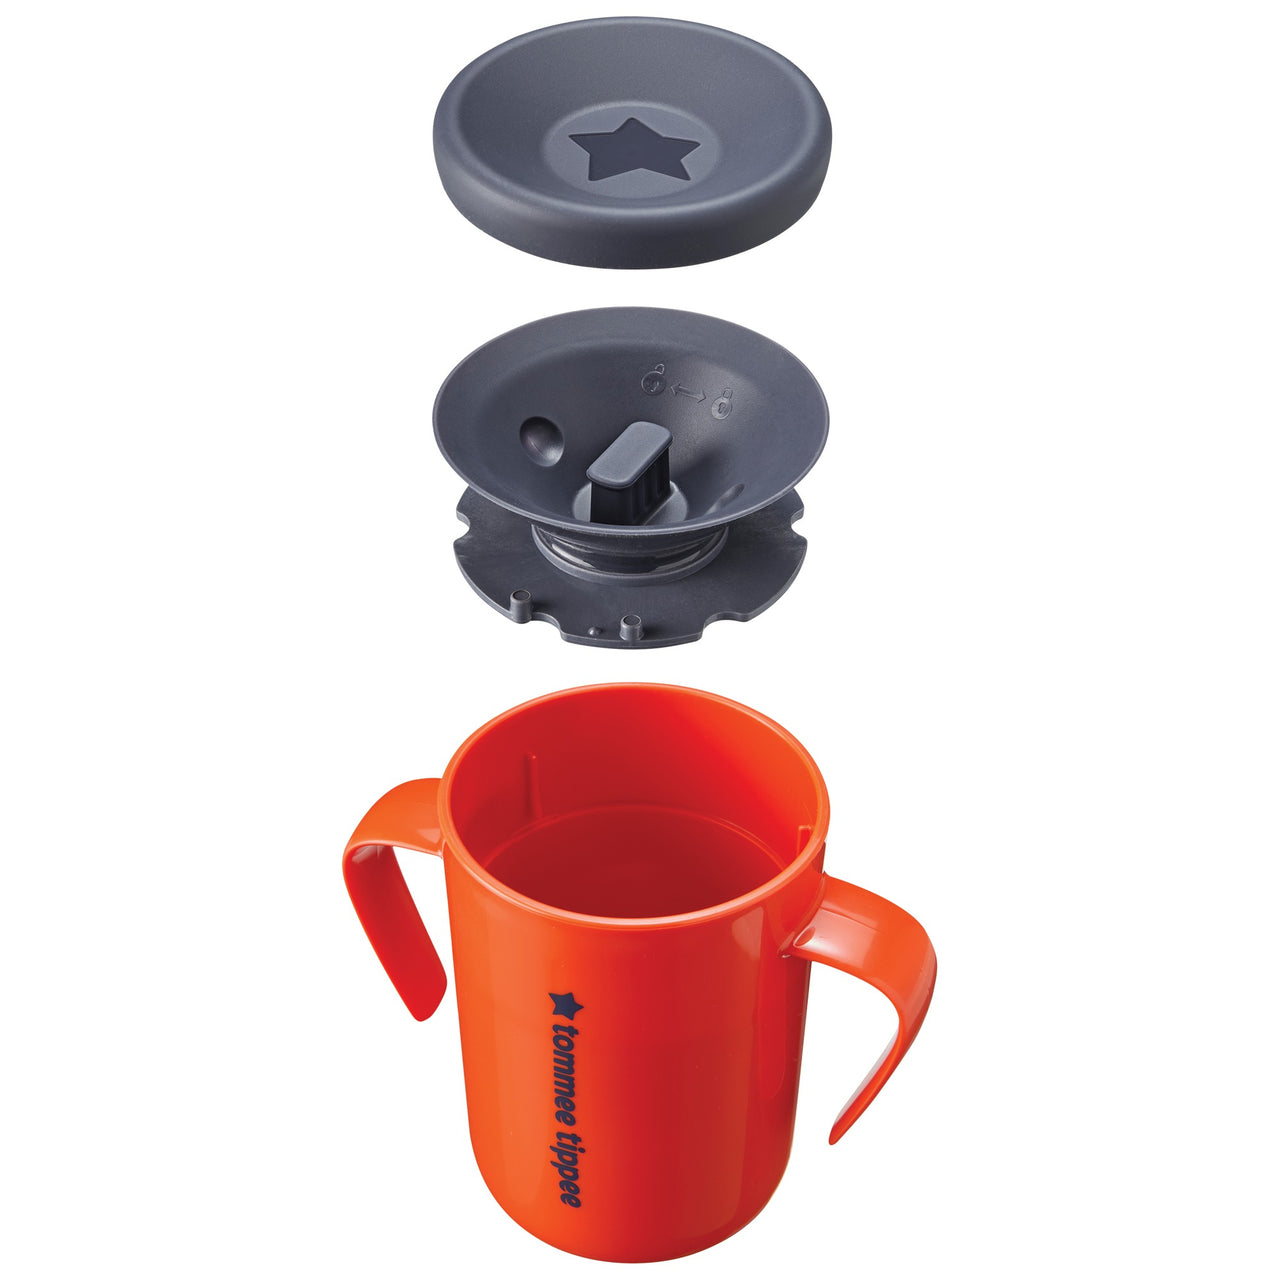 Easiflow 360°- Non-Spill Cup